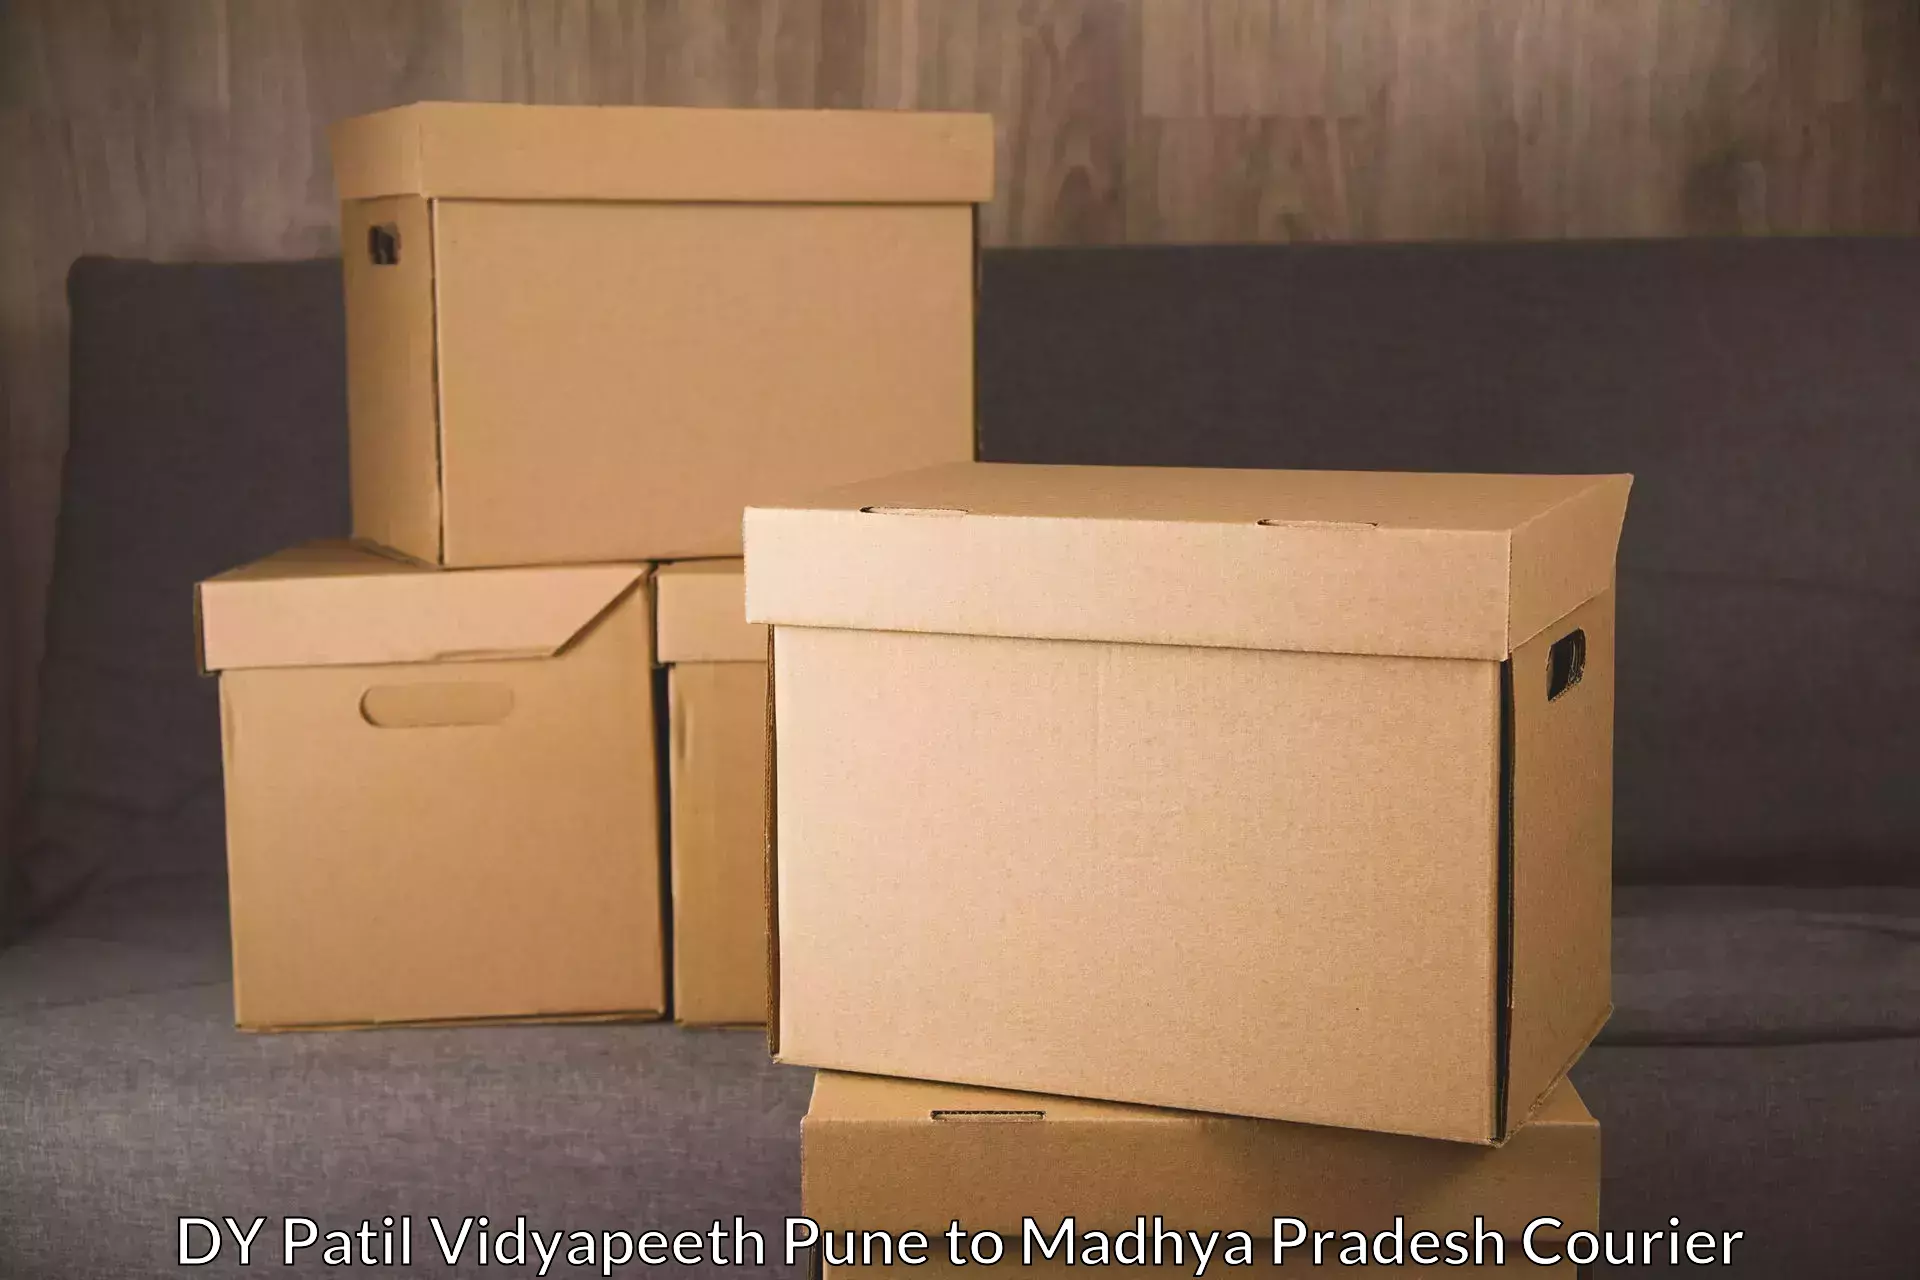 Corporate courier solutions in DY Patil Vidyapeeth Pune to Amarpatan